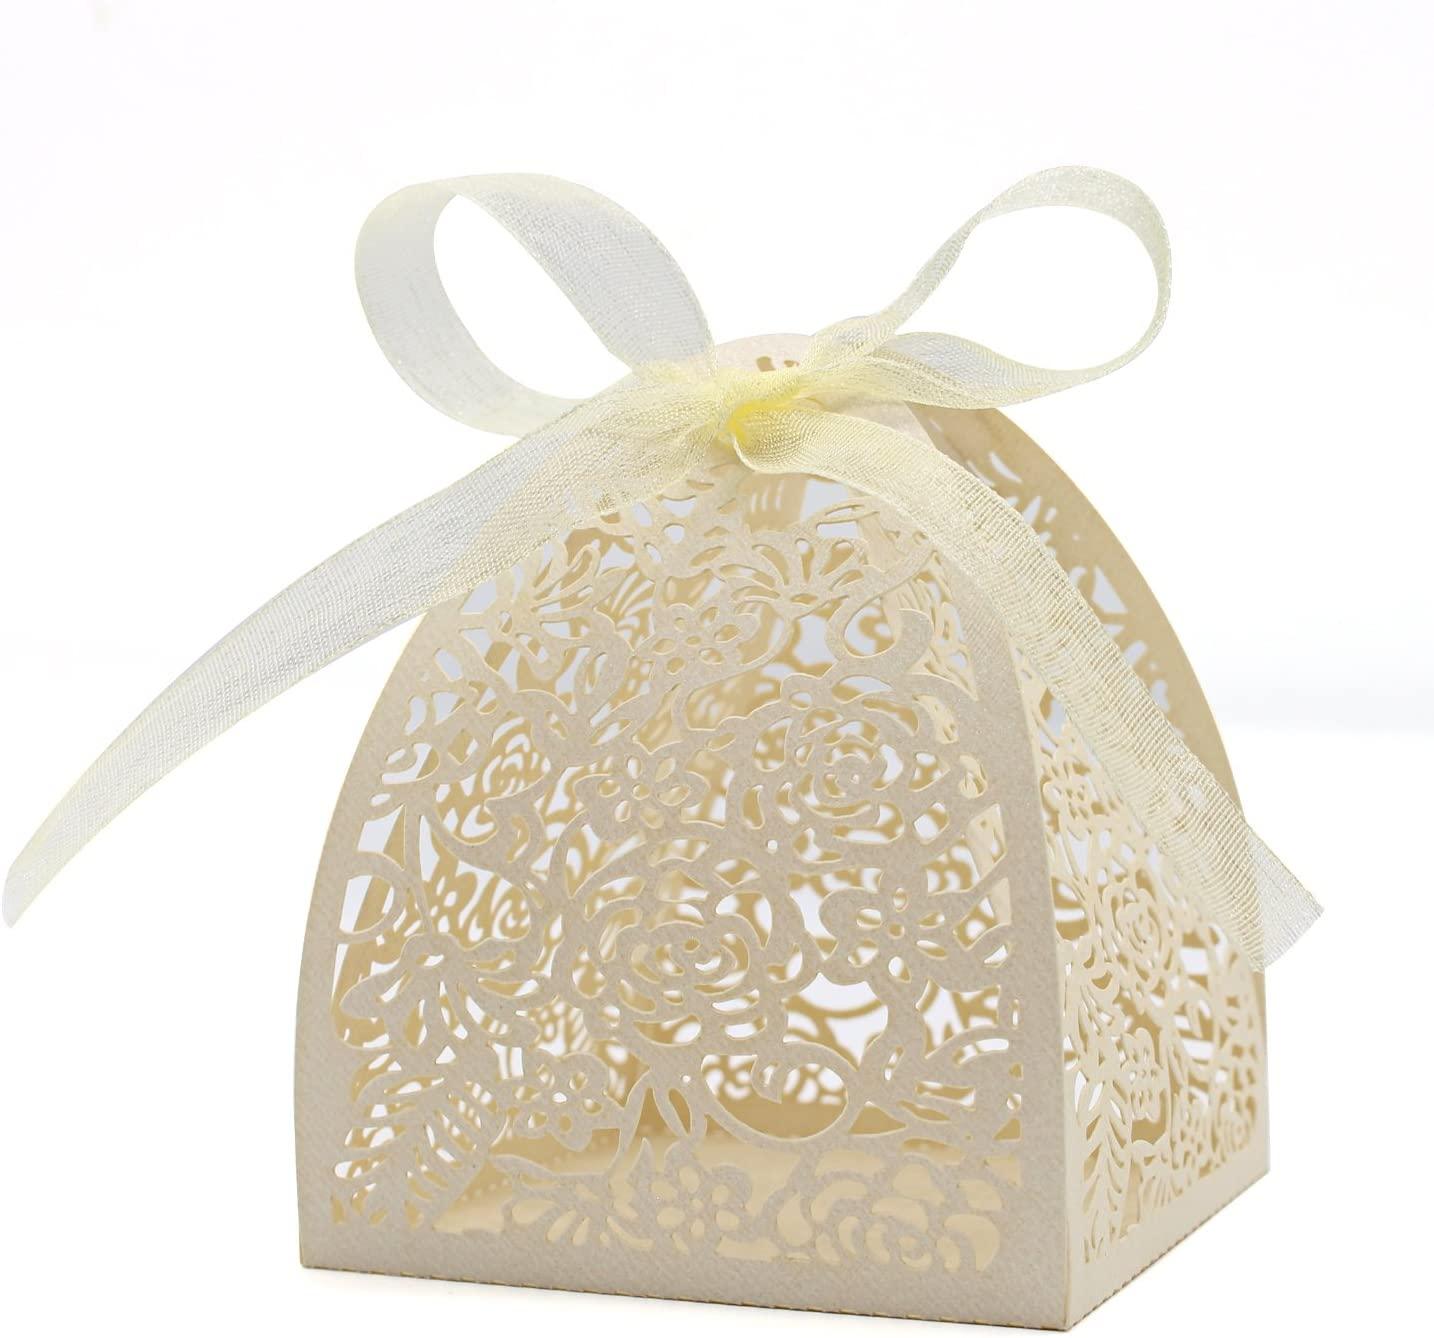 100pcs Laser Cut Rose Candy Boxes, Favor Boxes 2.5"x 2.5"x 3.1", Gift Boxes for Bridal Shower Wedding - If you say i do